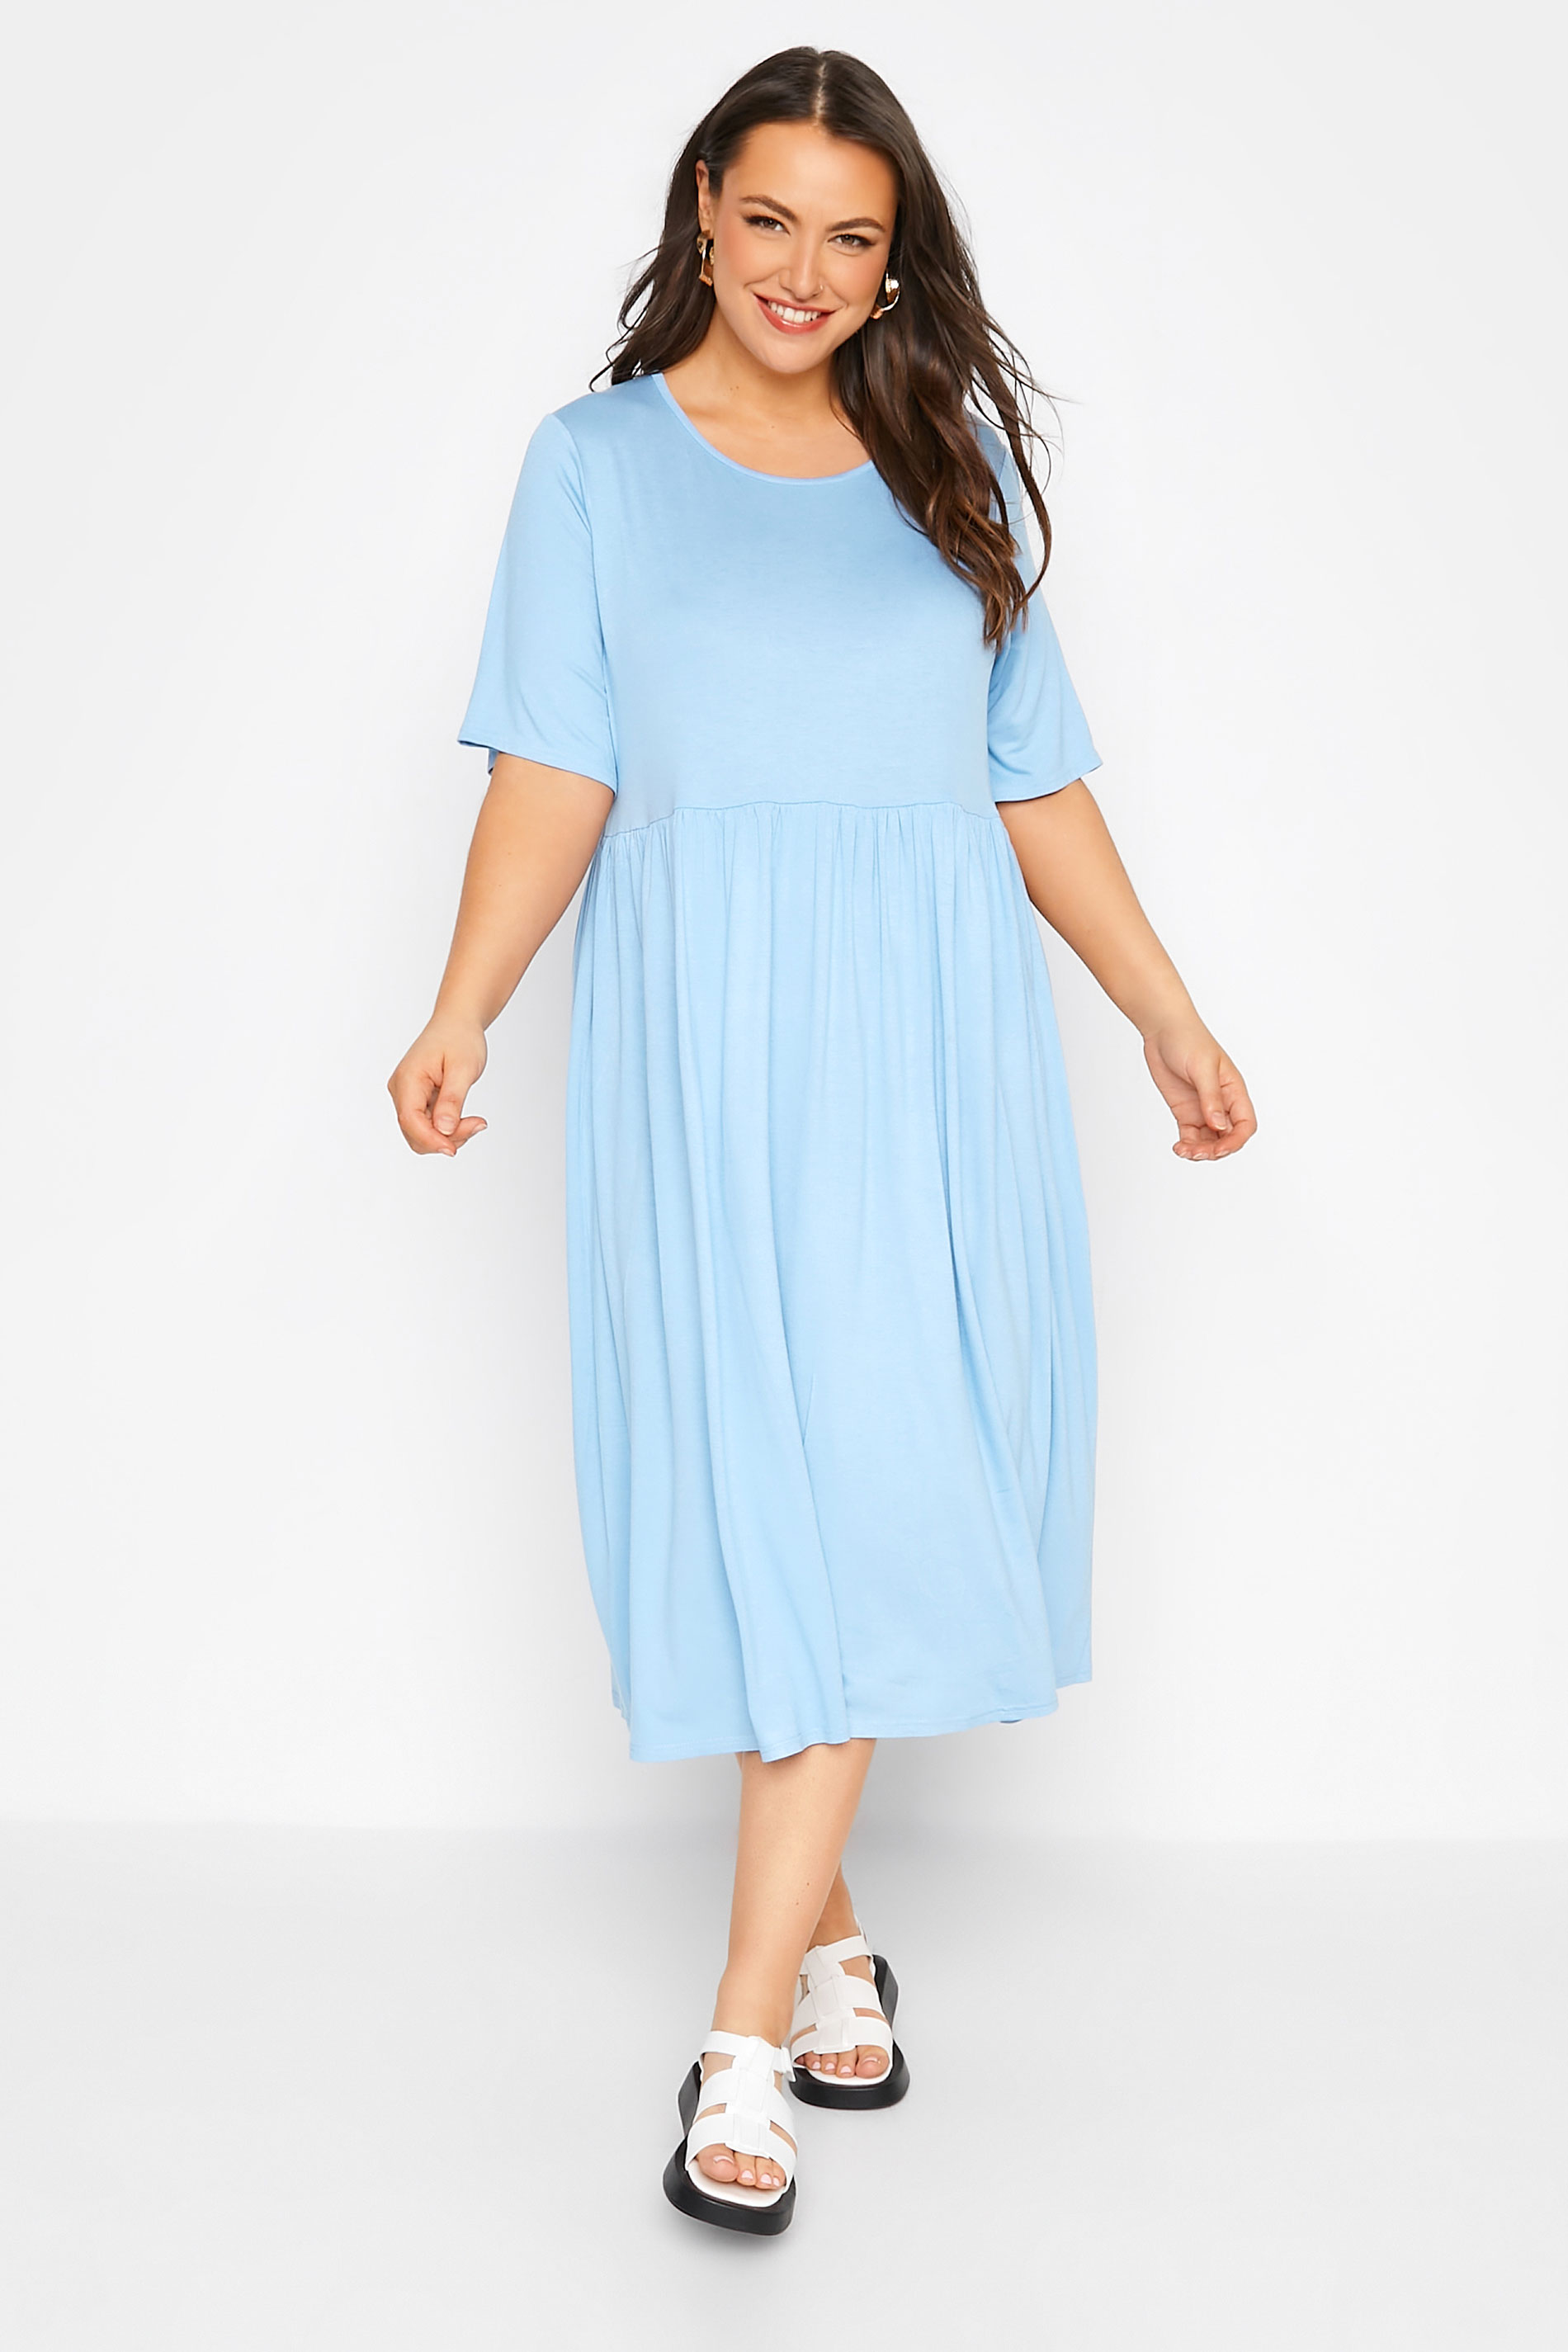 LIMITED COLLECTION Curve Light Blue Midaxi Smock Dress_A.jpg